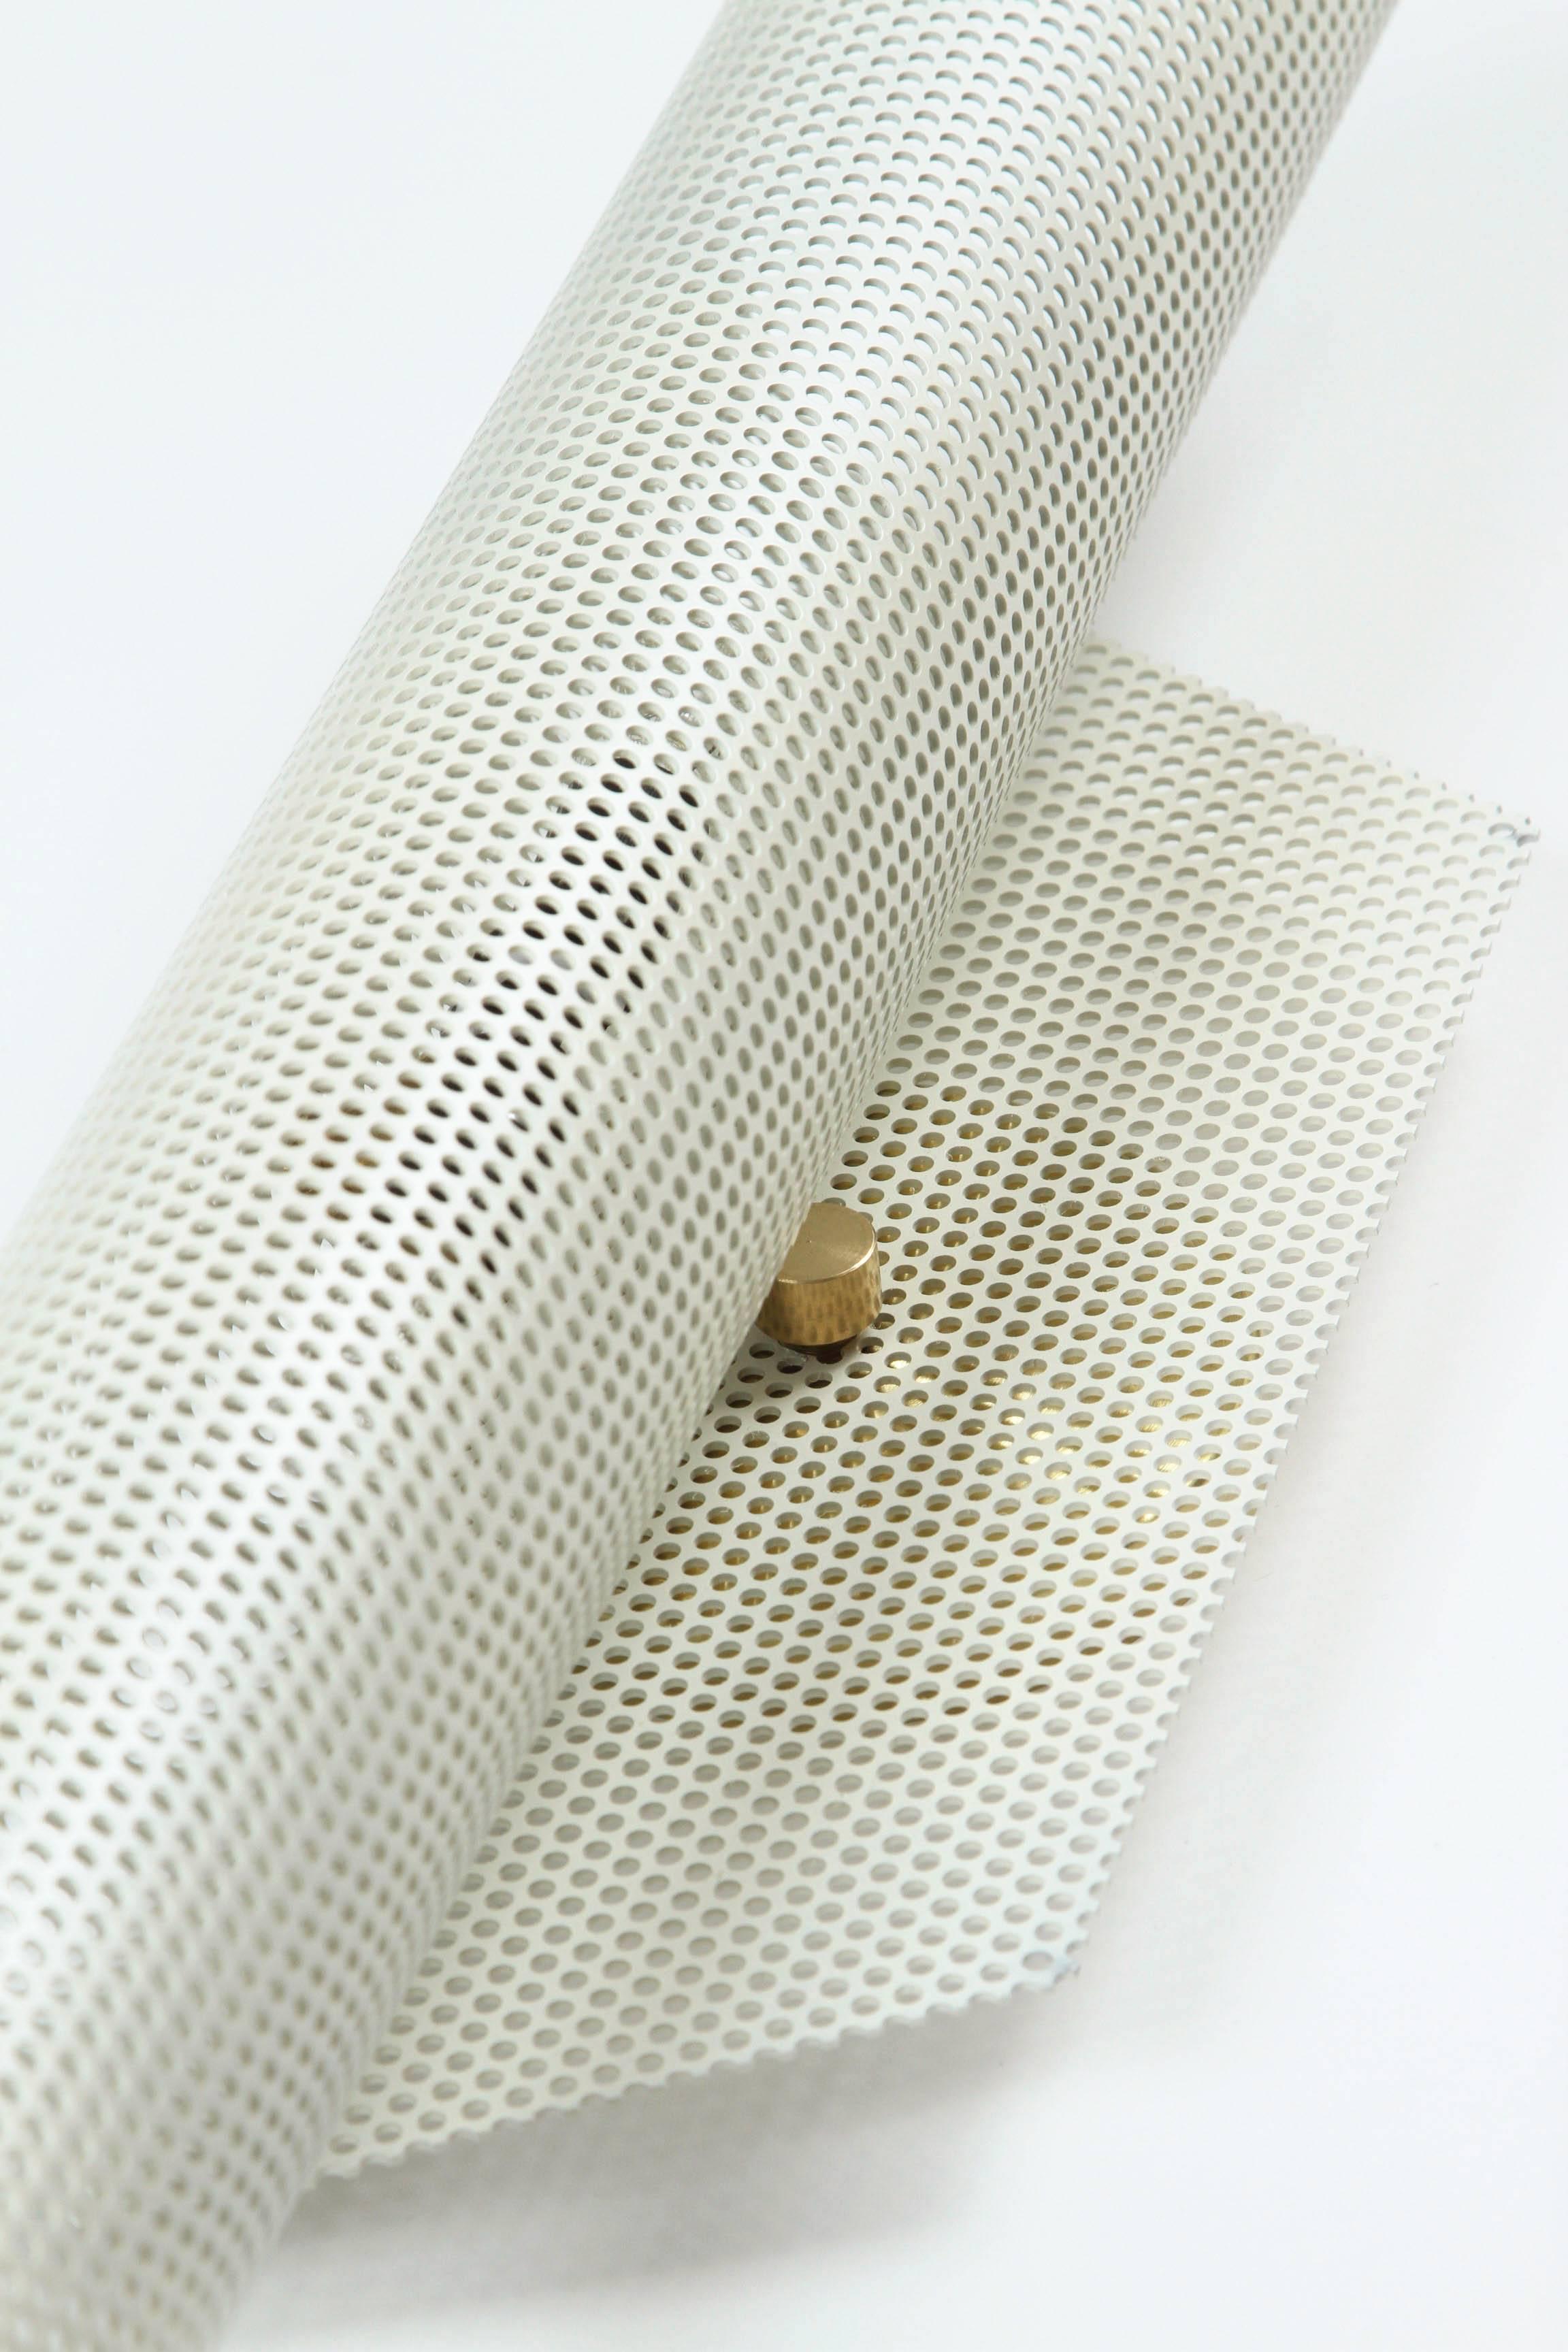 Steel Rolled Perforated Sconce by Lawson-Fenning